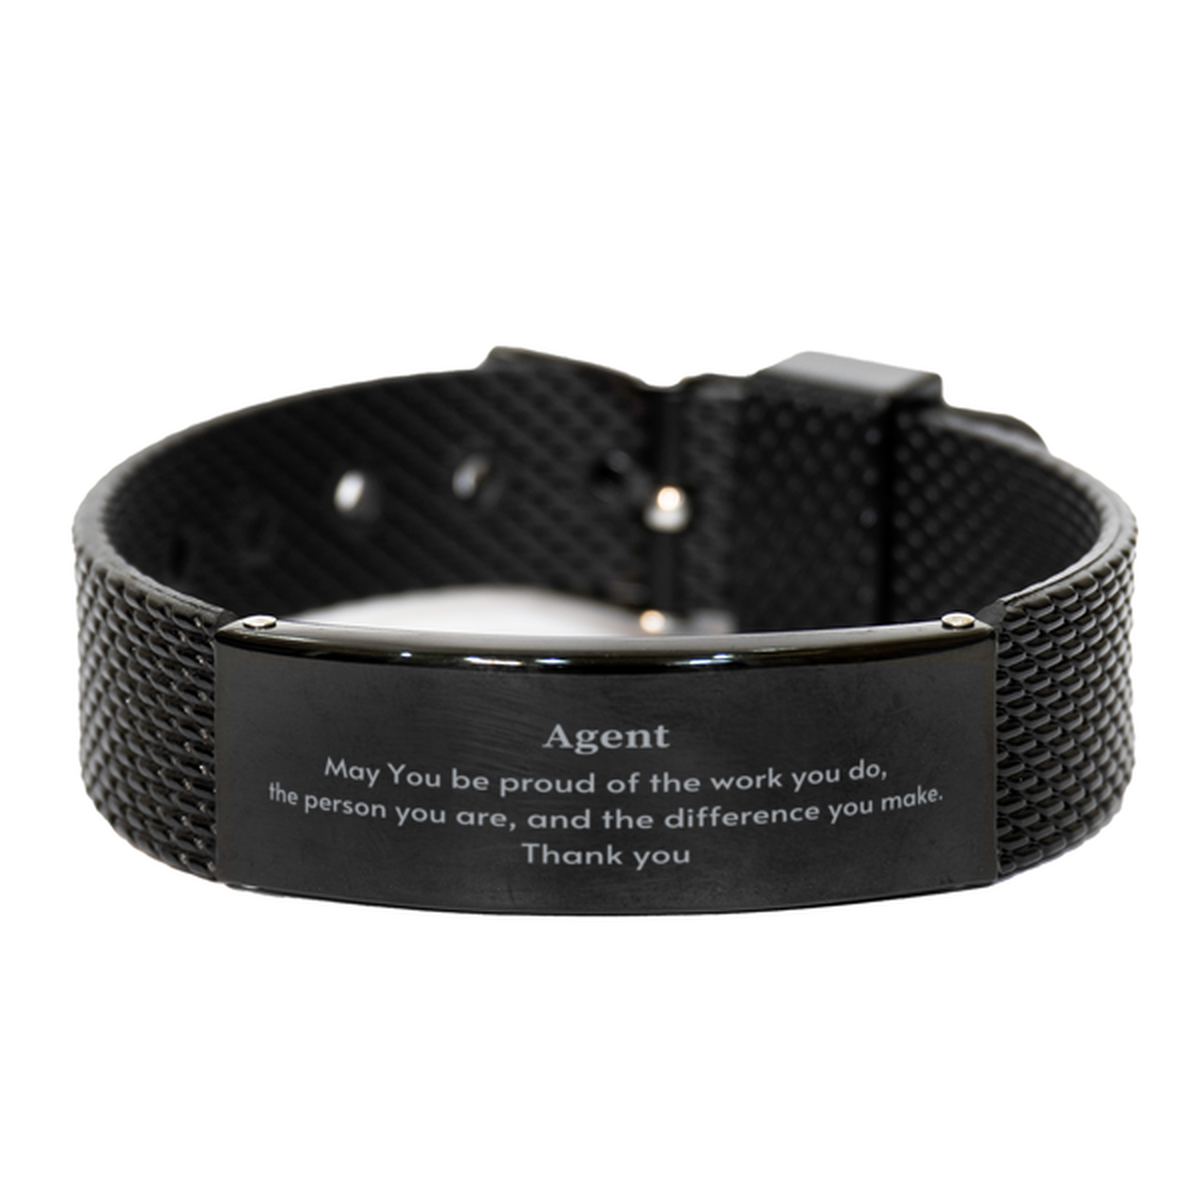 Heartwarming Black Shark Mesh Bracelet Retirement Coworkers Gifts for Agent, Agent May You be proud of the work you do, the person you are Gifts for Boss Men Women Friends